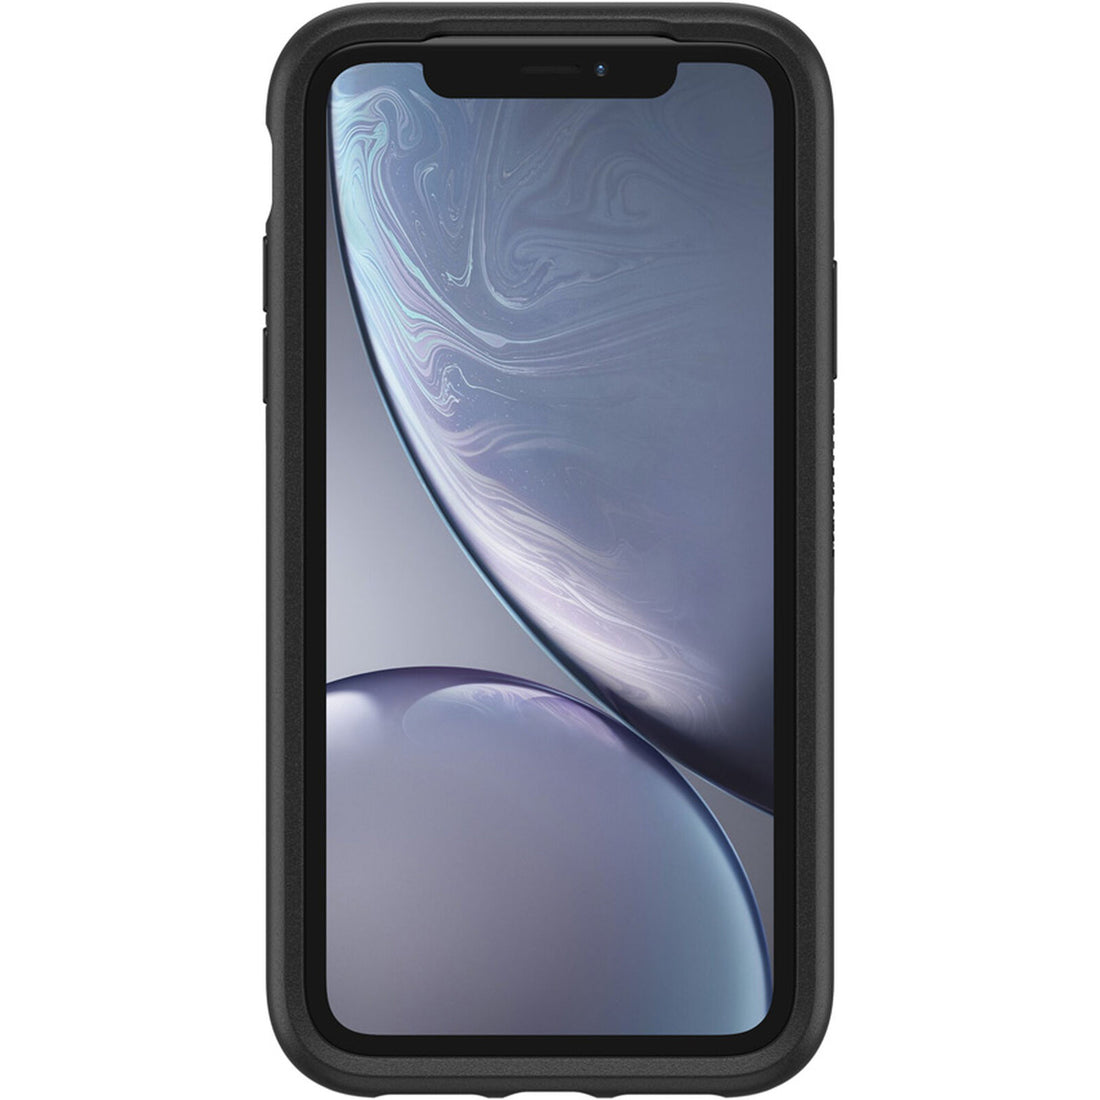 OtterBox SYMMETRY SERIES Case for Apple iPhone XR - Black (Certified Refurbished)